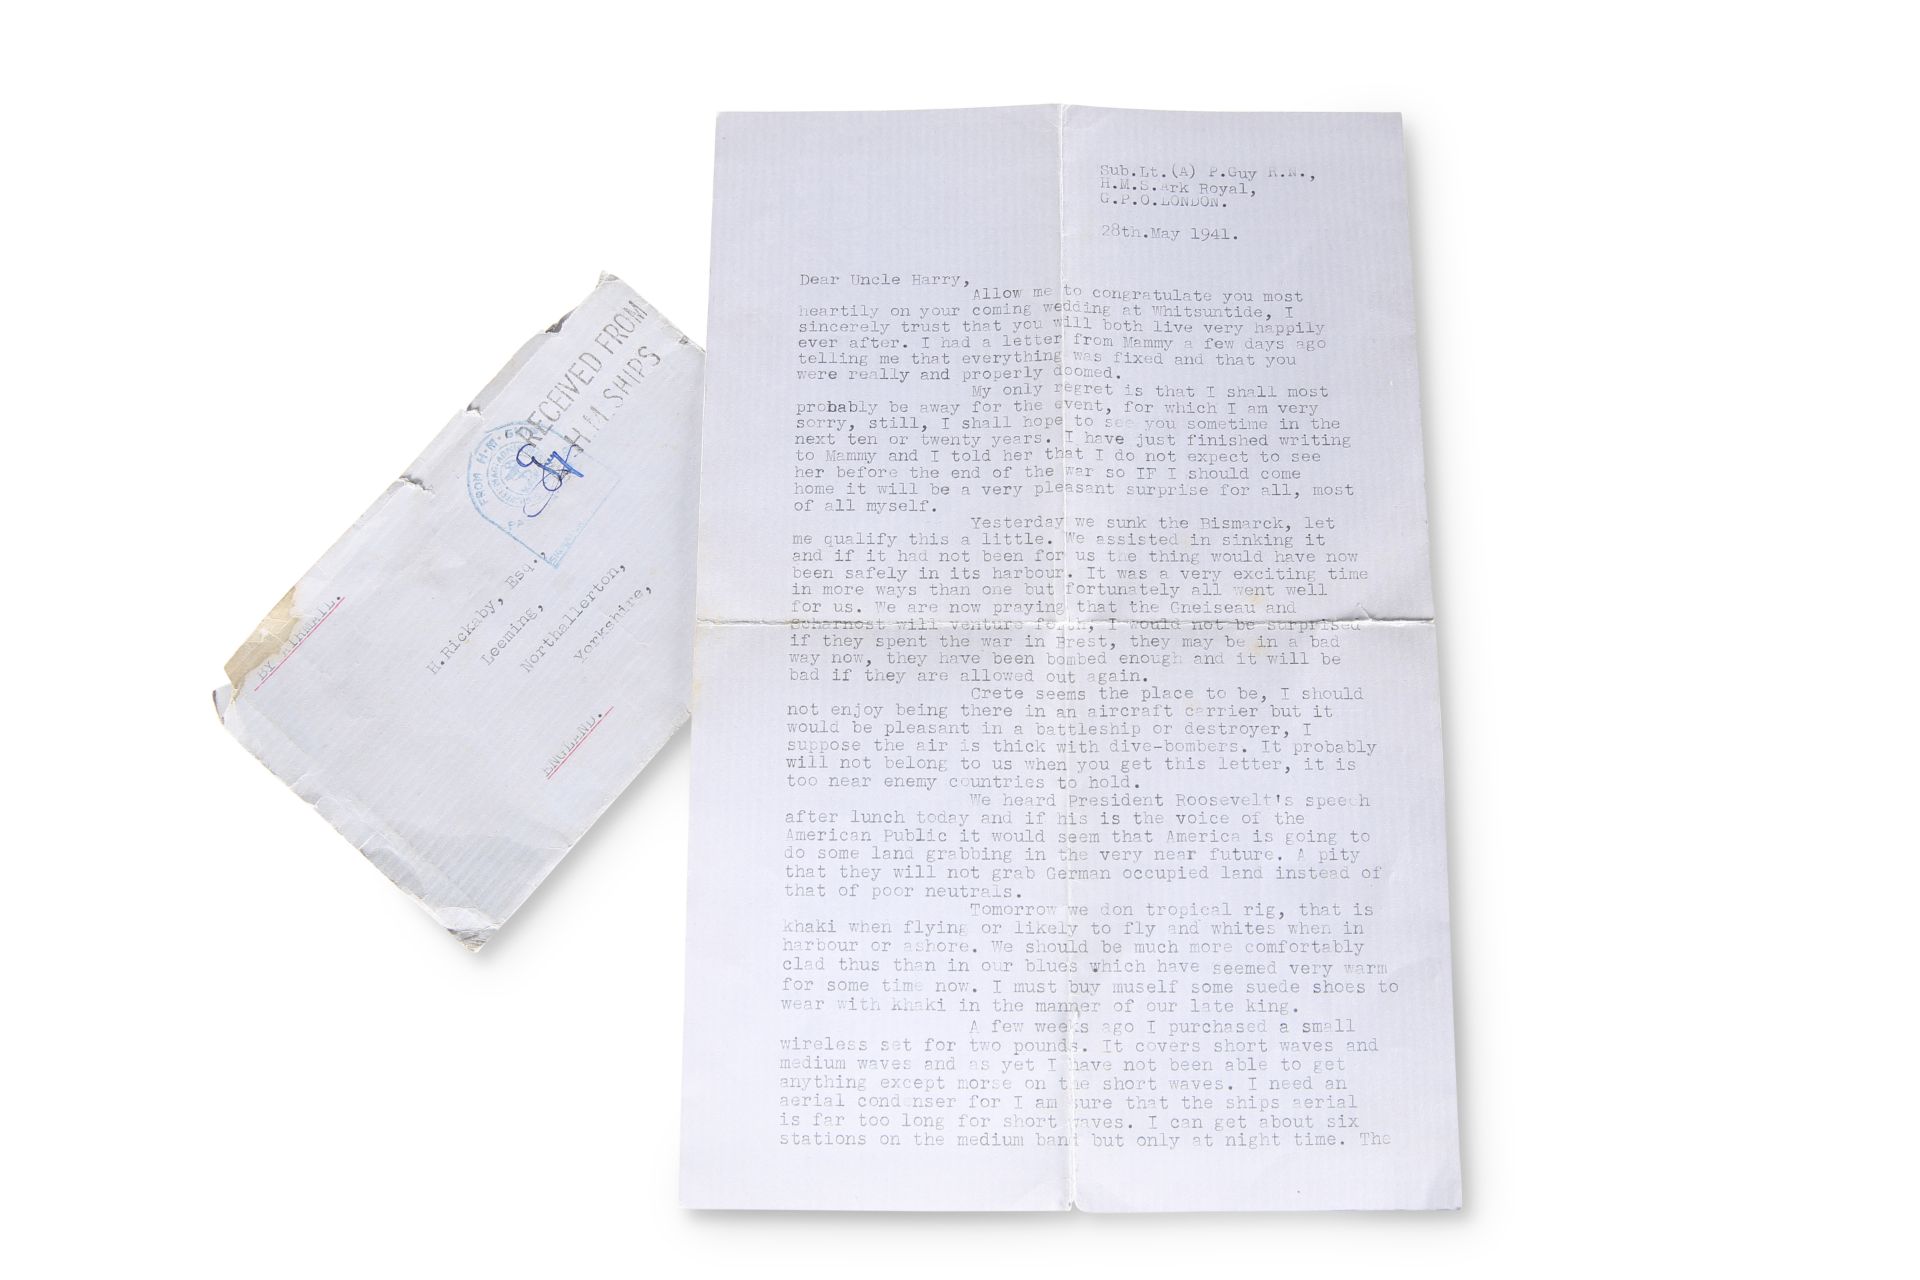 A TWO-SIDED TYPED LETTER FROM SUB. LT. (A) P. GUY R.N. OF H.M.S. ARK ROYAL